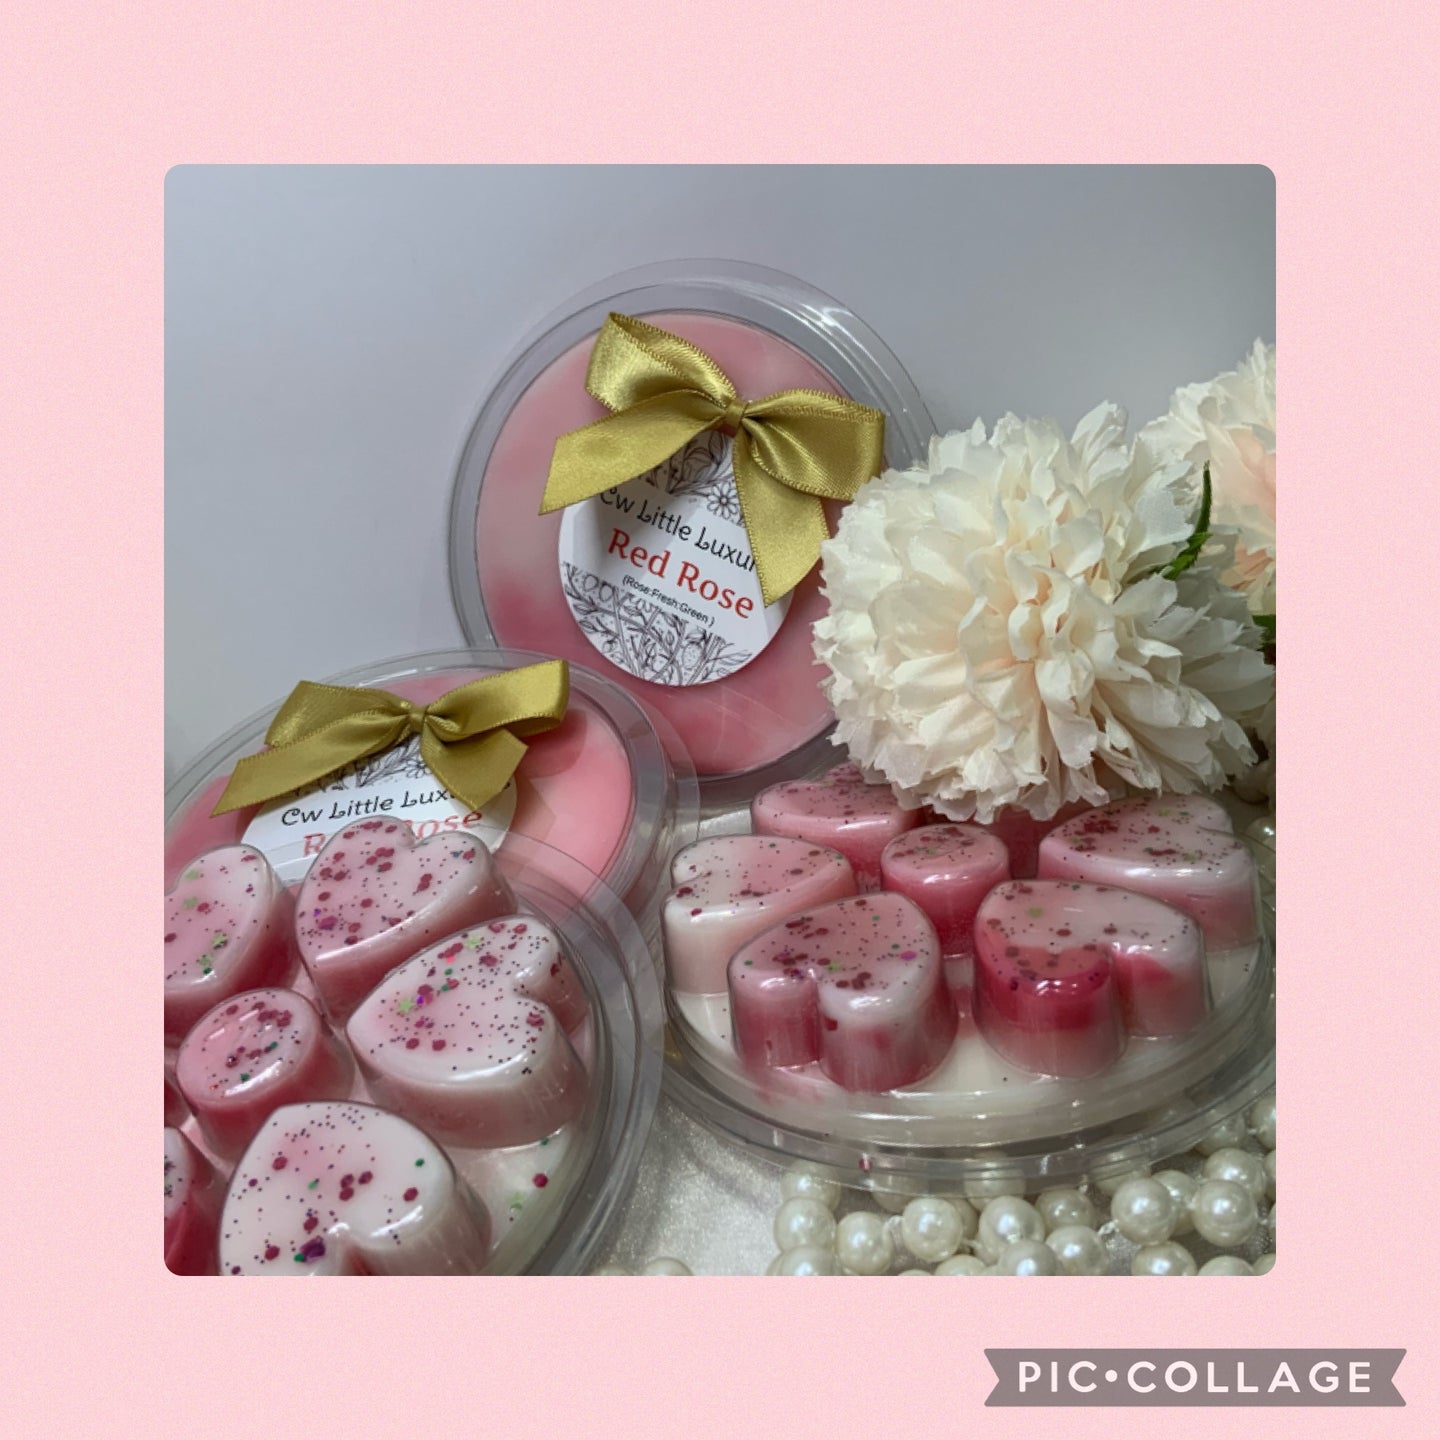 Red Rose Wax Melts